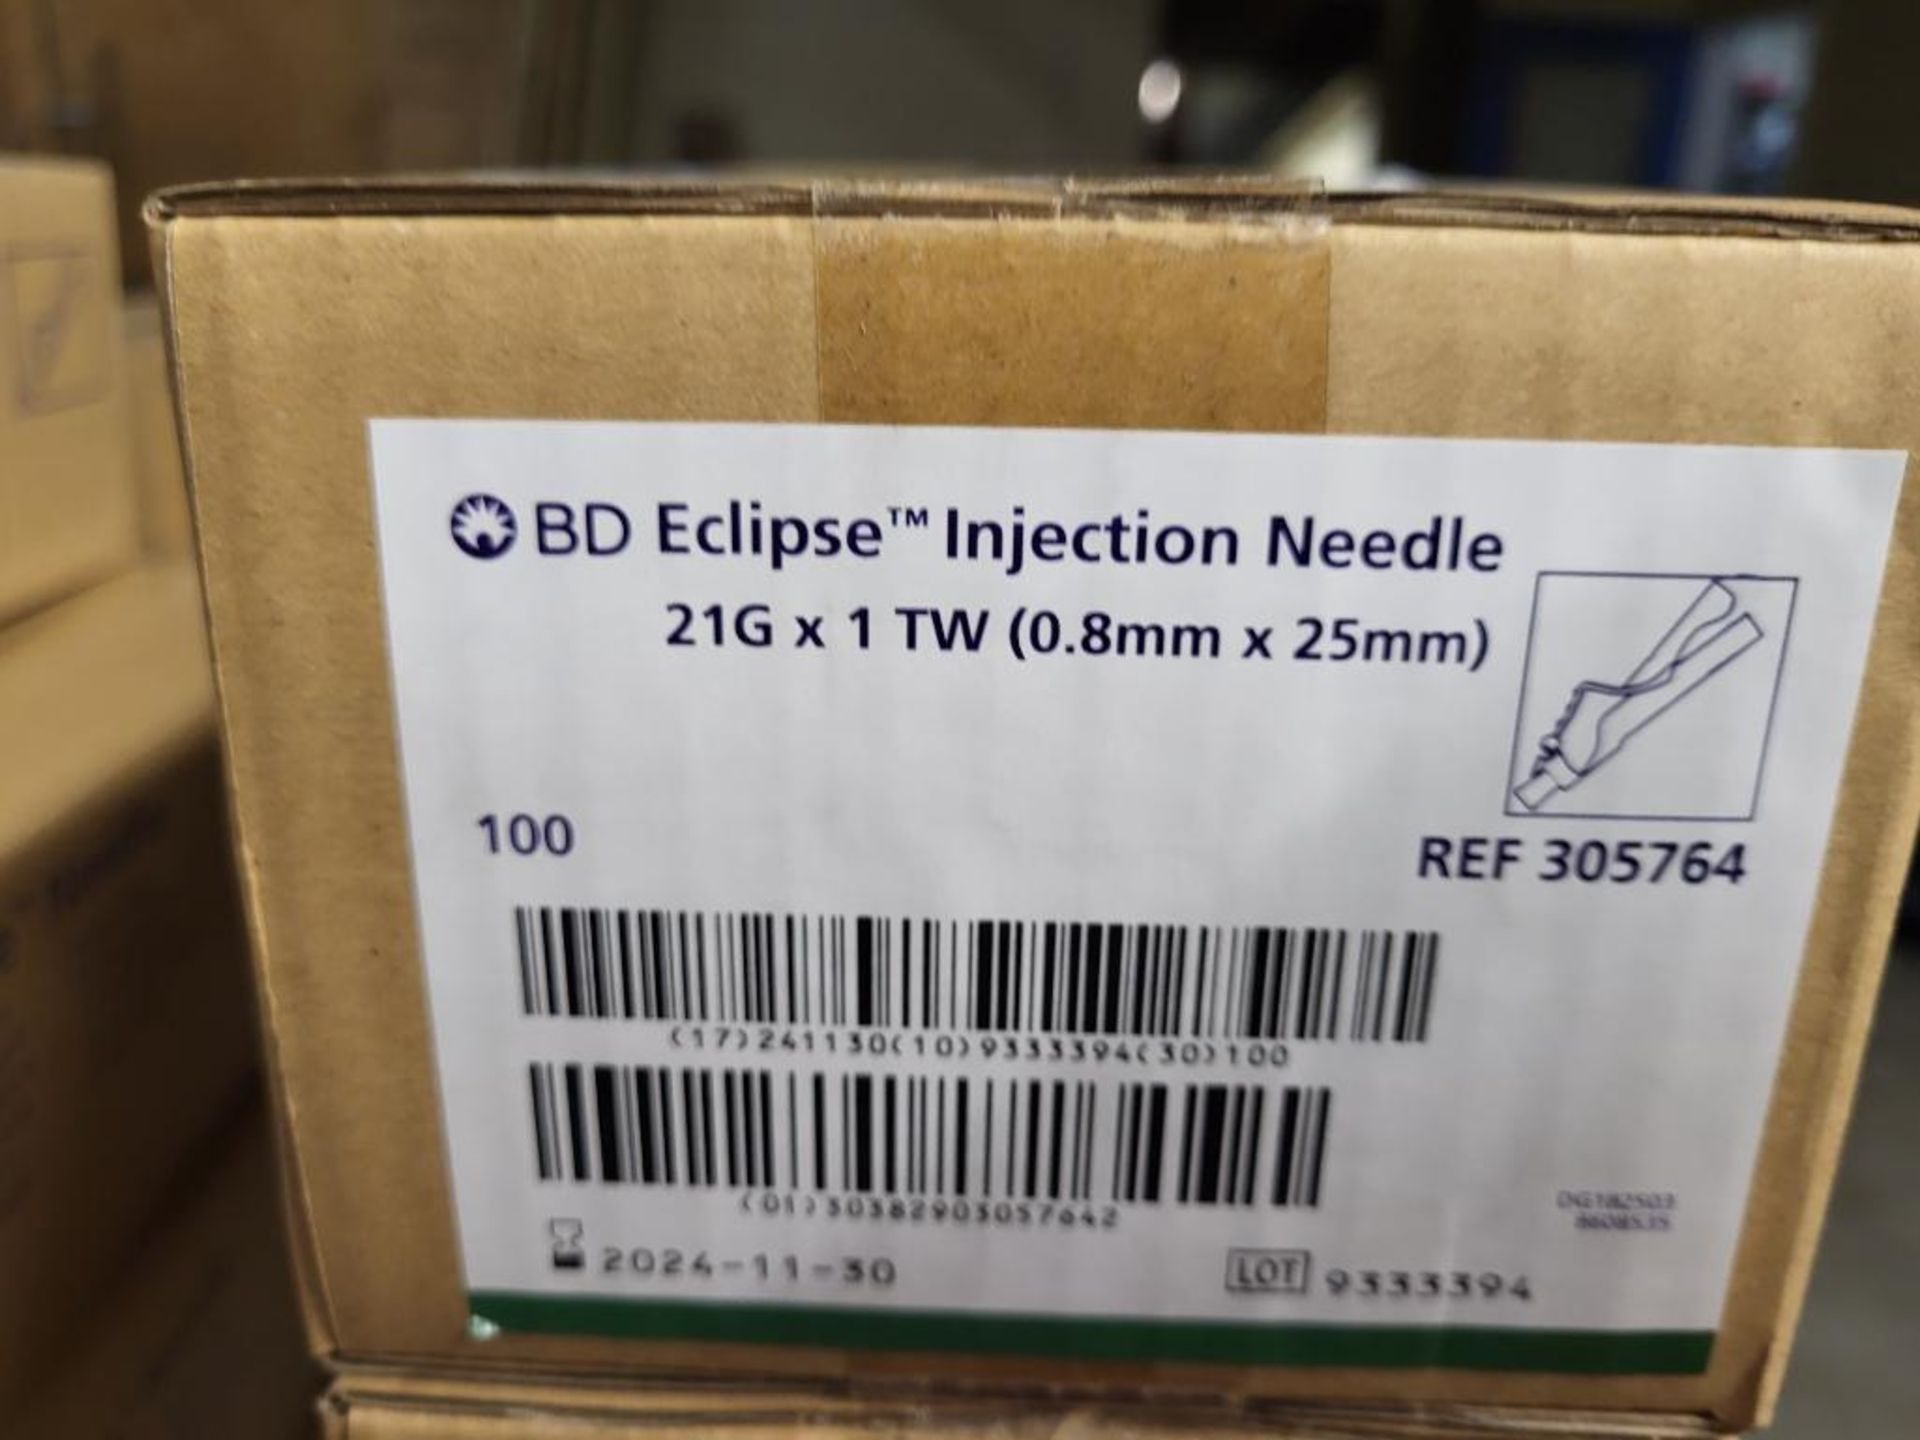 New Boxes of 100 BD Eclipse Injection Needles 21G x 1 TW